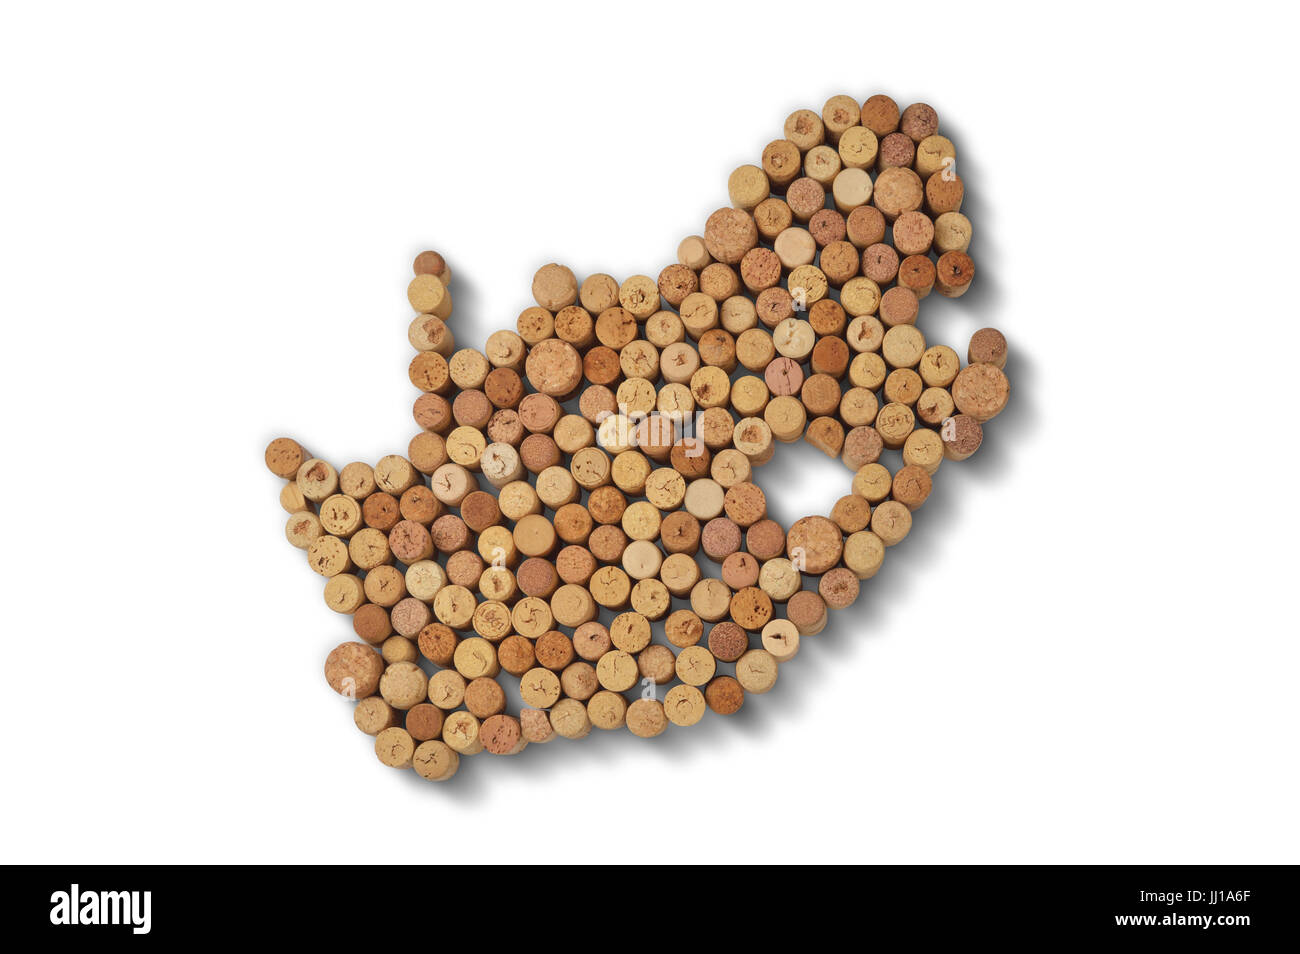 Wine-producing countries - maps from wine corks. Map of South Africa on white background. Clipping path included. Stock Photo